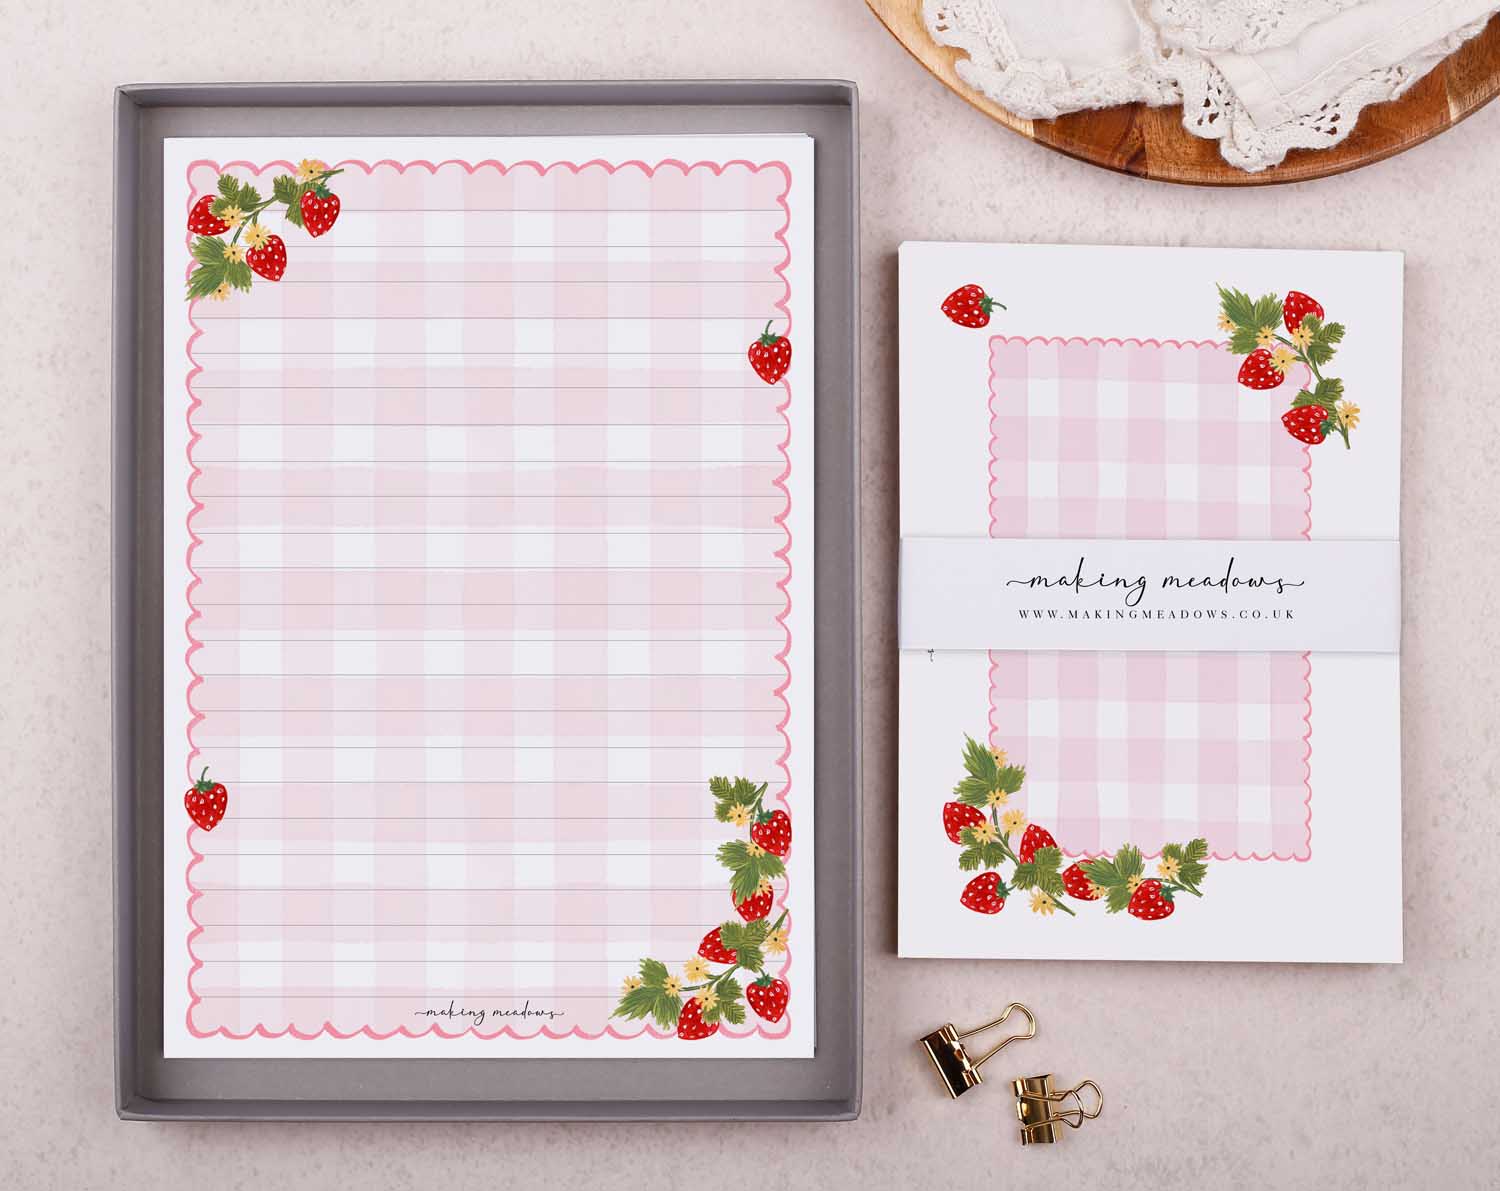 Gingham Strawberry A5 Writing Paper & Envelope Set